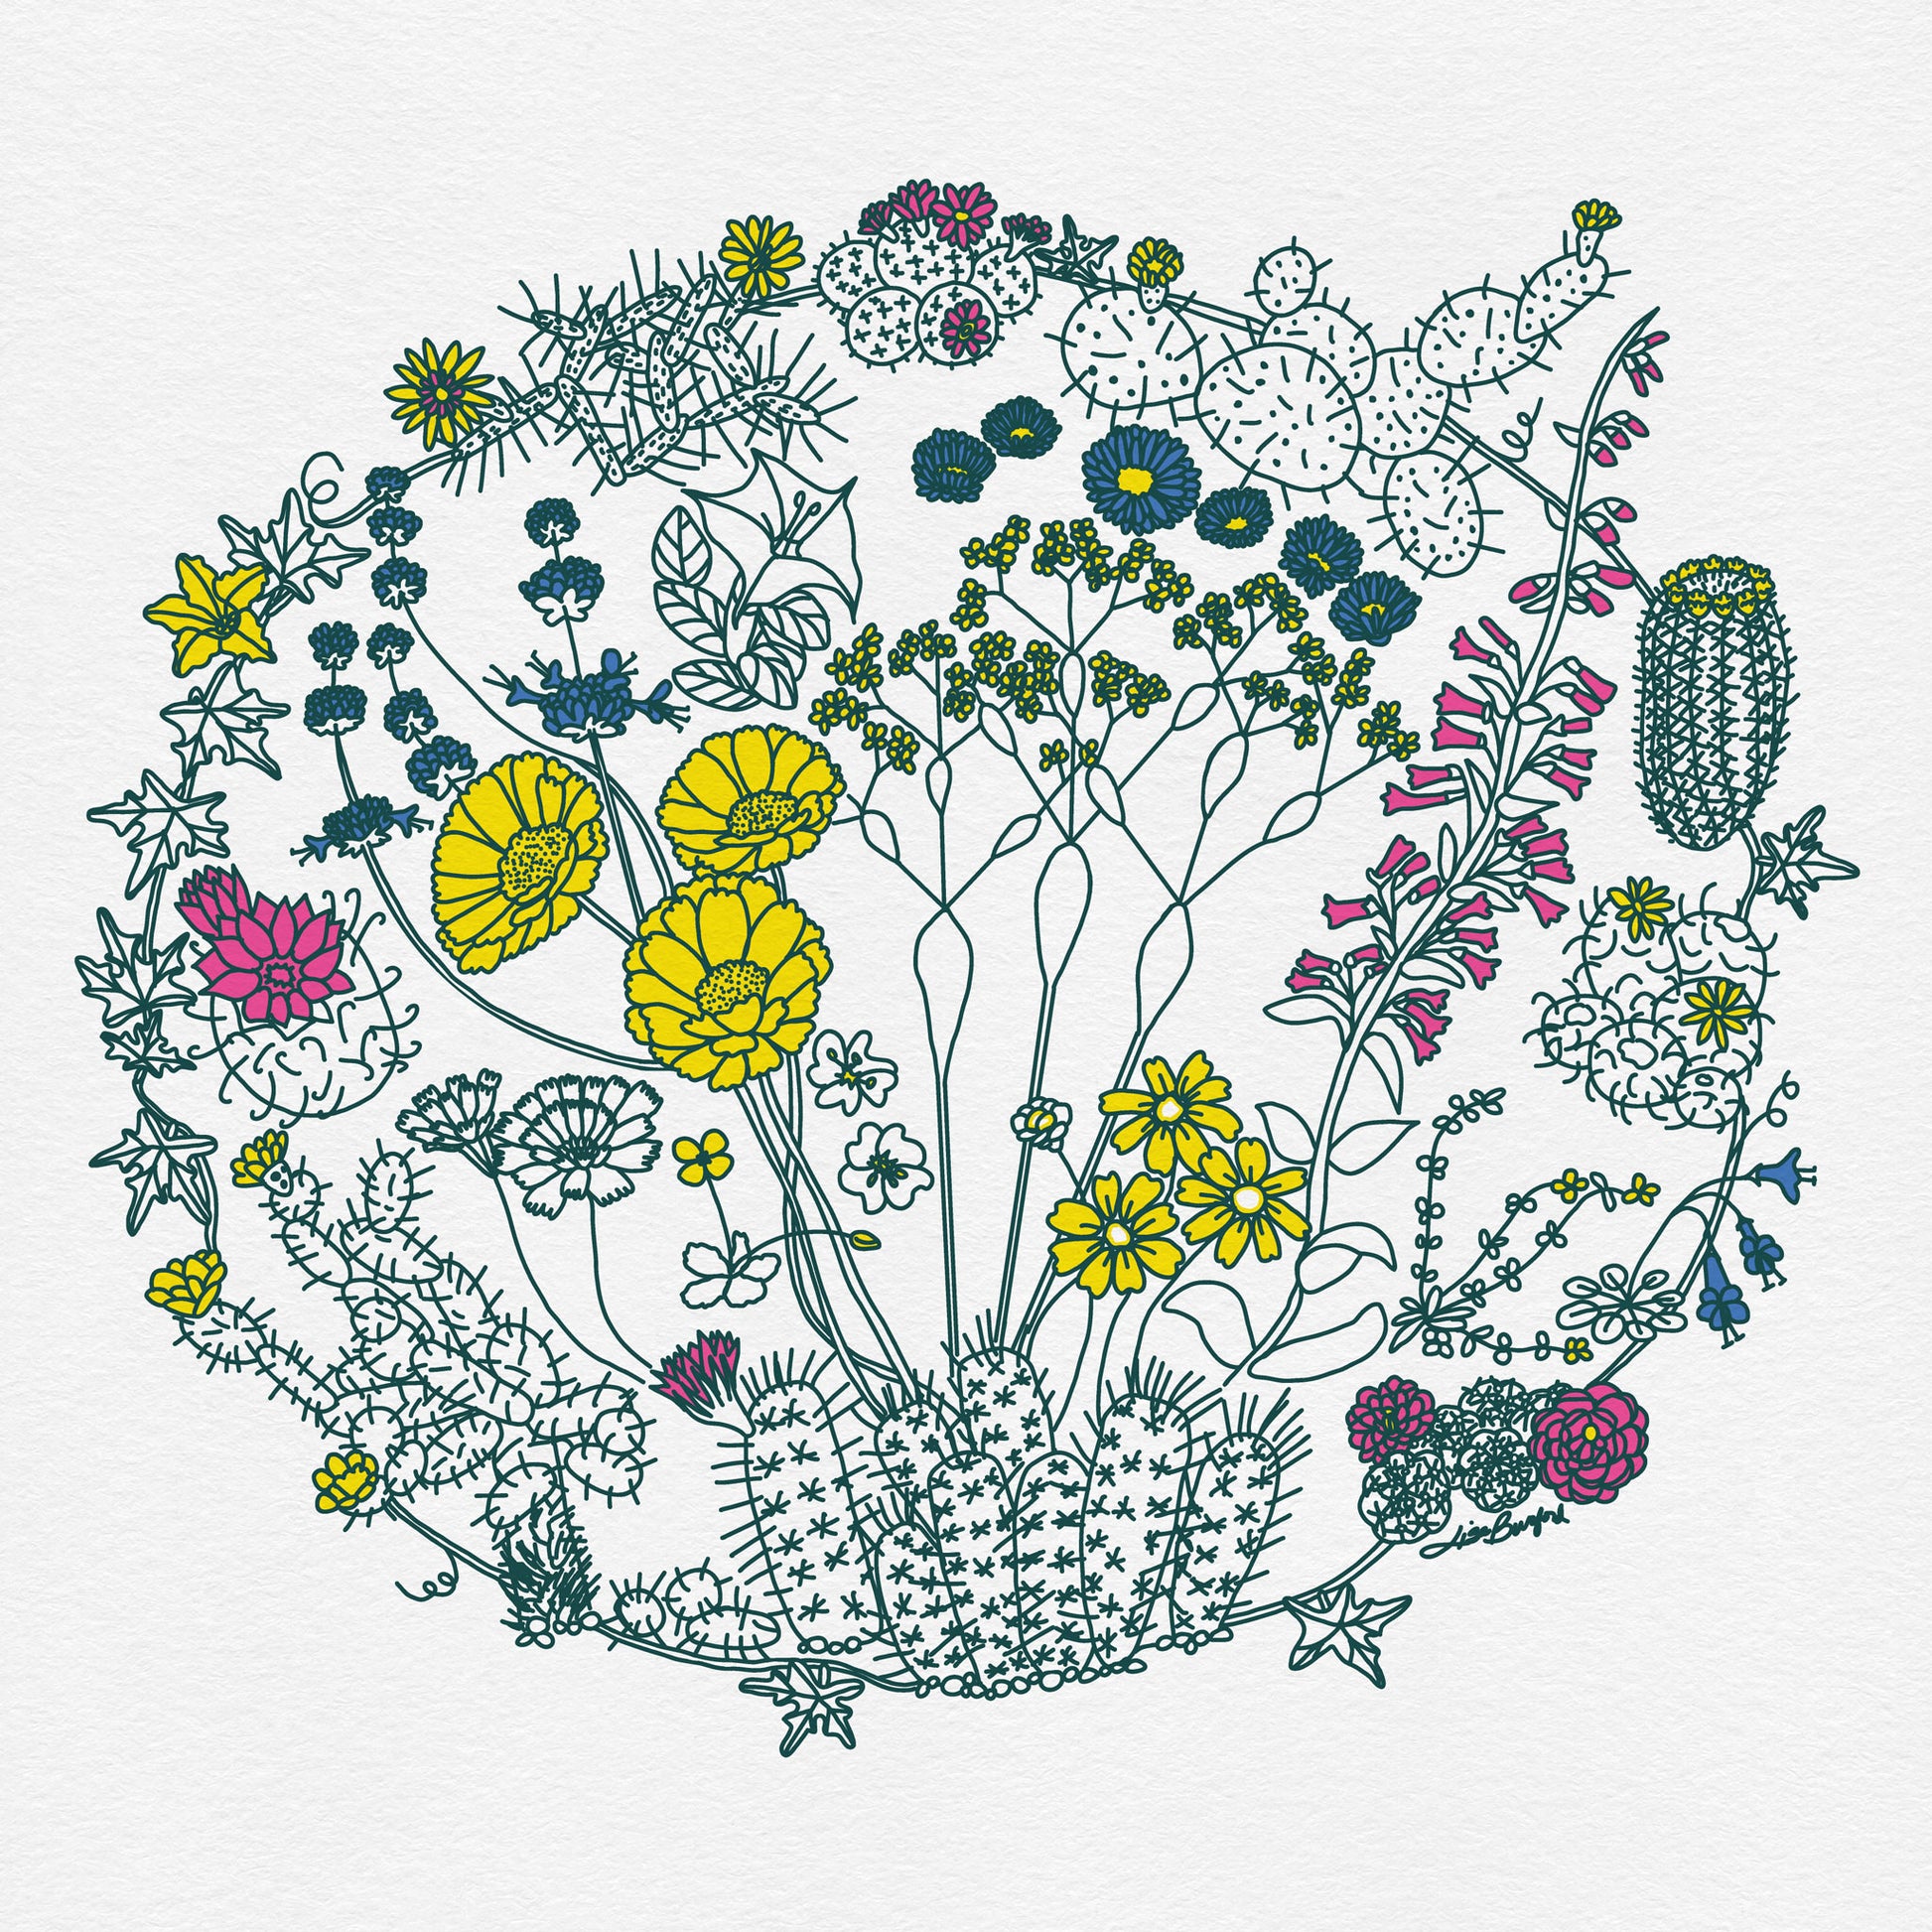 An illustration of flowers on plants that can be found in the Mojave Desert and/or Joshua Tree National Park. The outlines of the plants are a dark green color. Some of the flowers are colored a bright yellow, some a bright pink, and some a bright blue. The composition is in a circular shape.